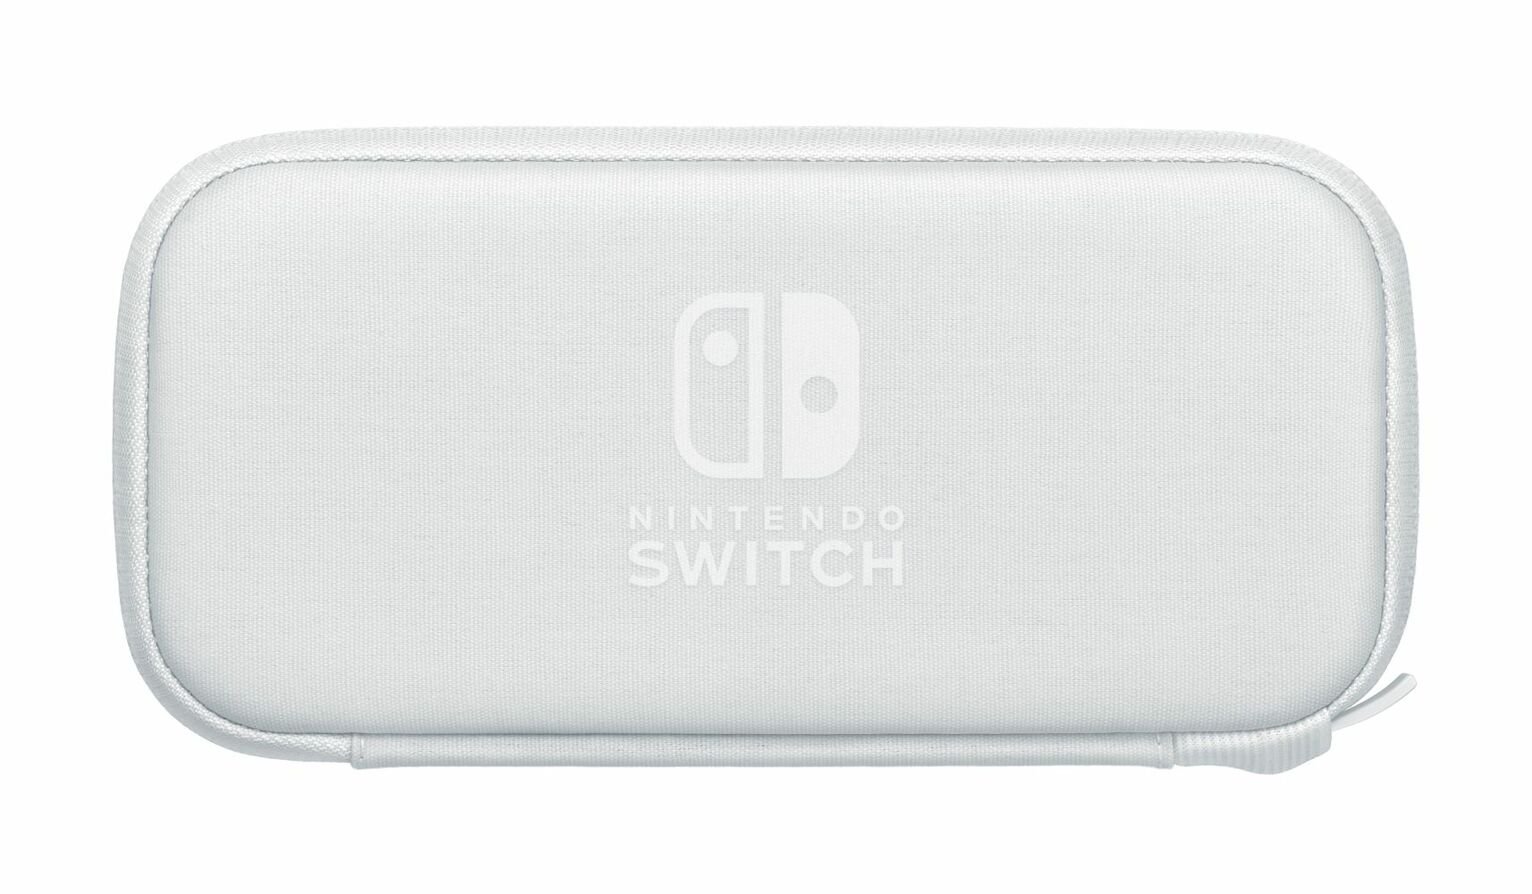 Nintendo Switch Lite Carrying Case Review